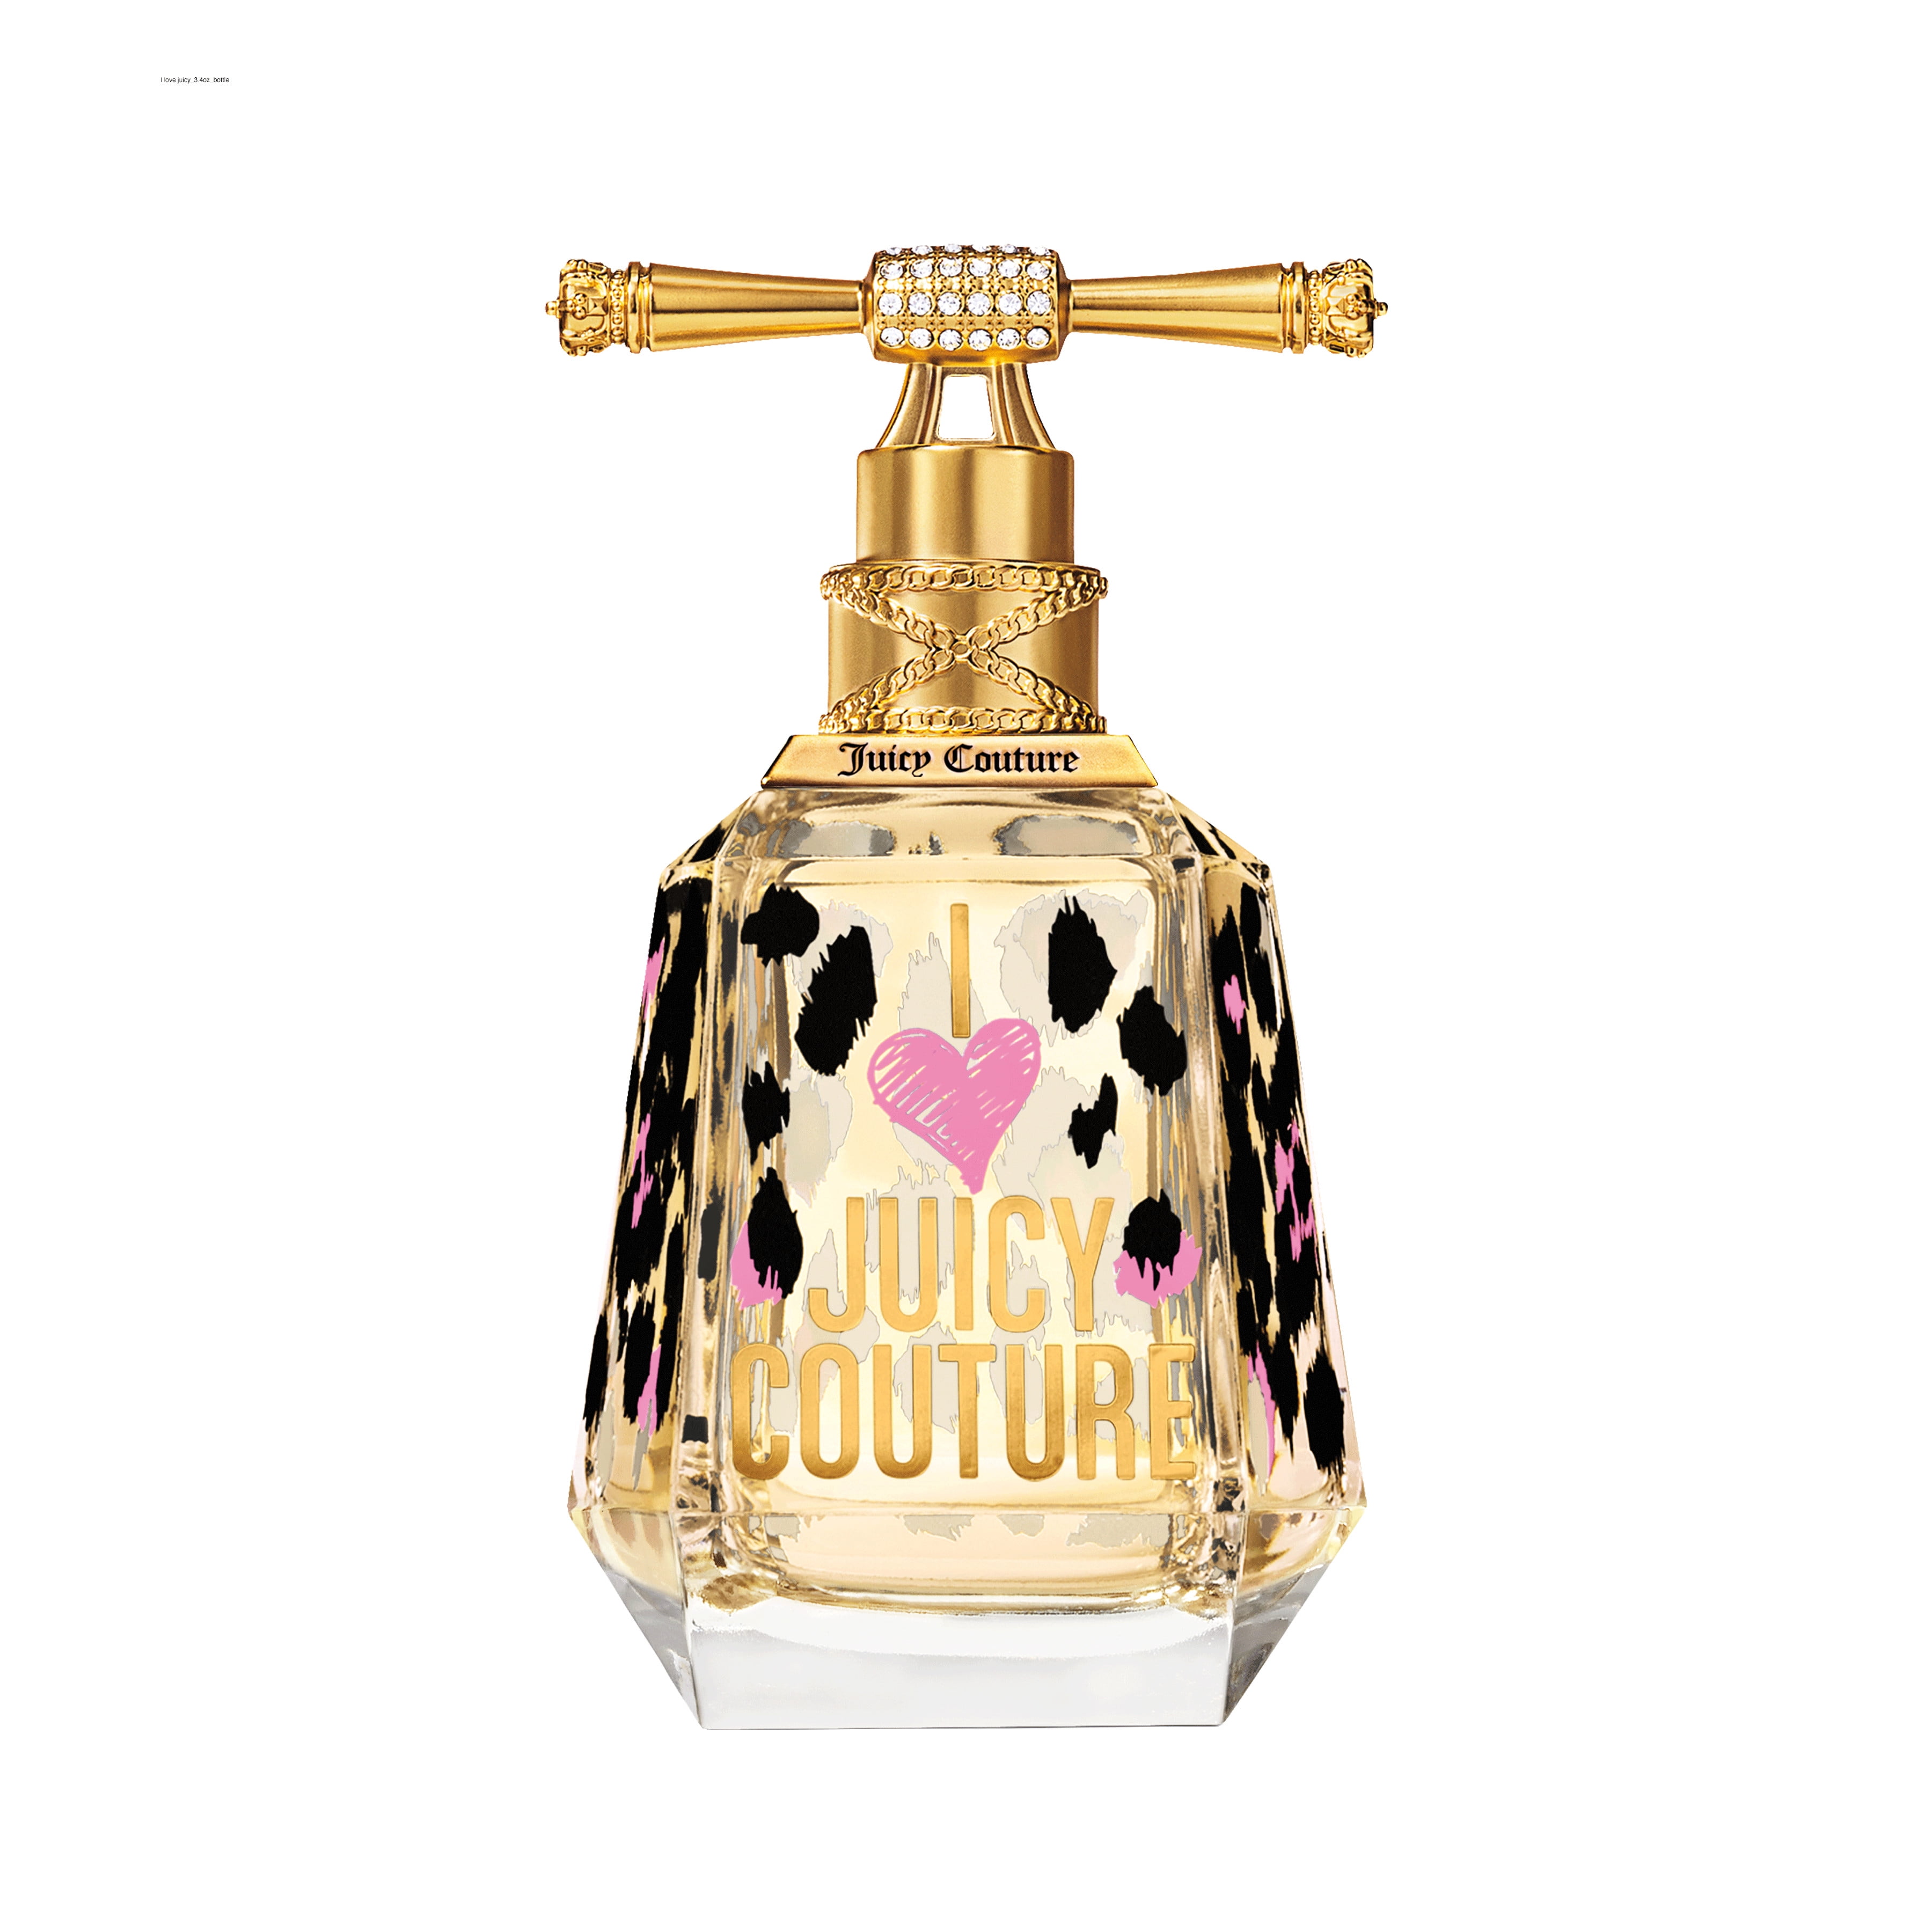 Juicy Couture I Love Juicy Couture, Perfume for Women, 1.7 fl. oz